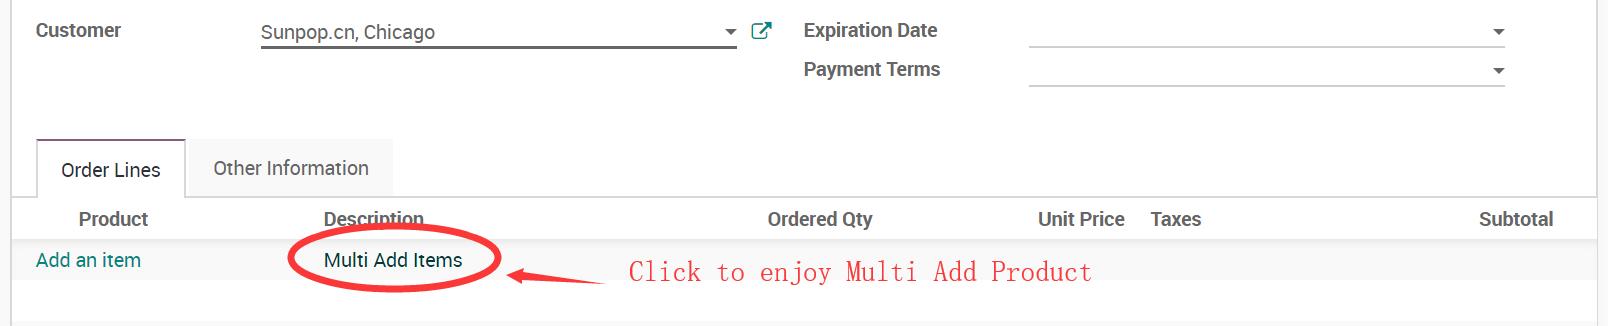 App Purchase Order Product Multi Add